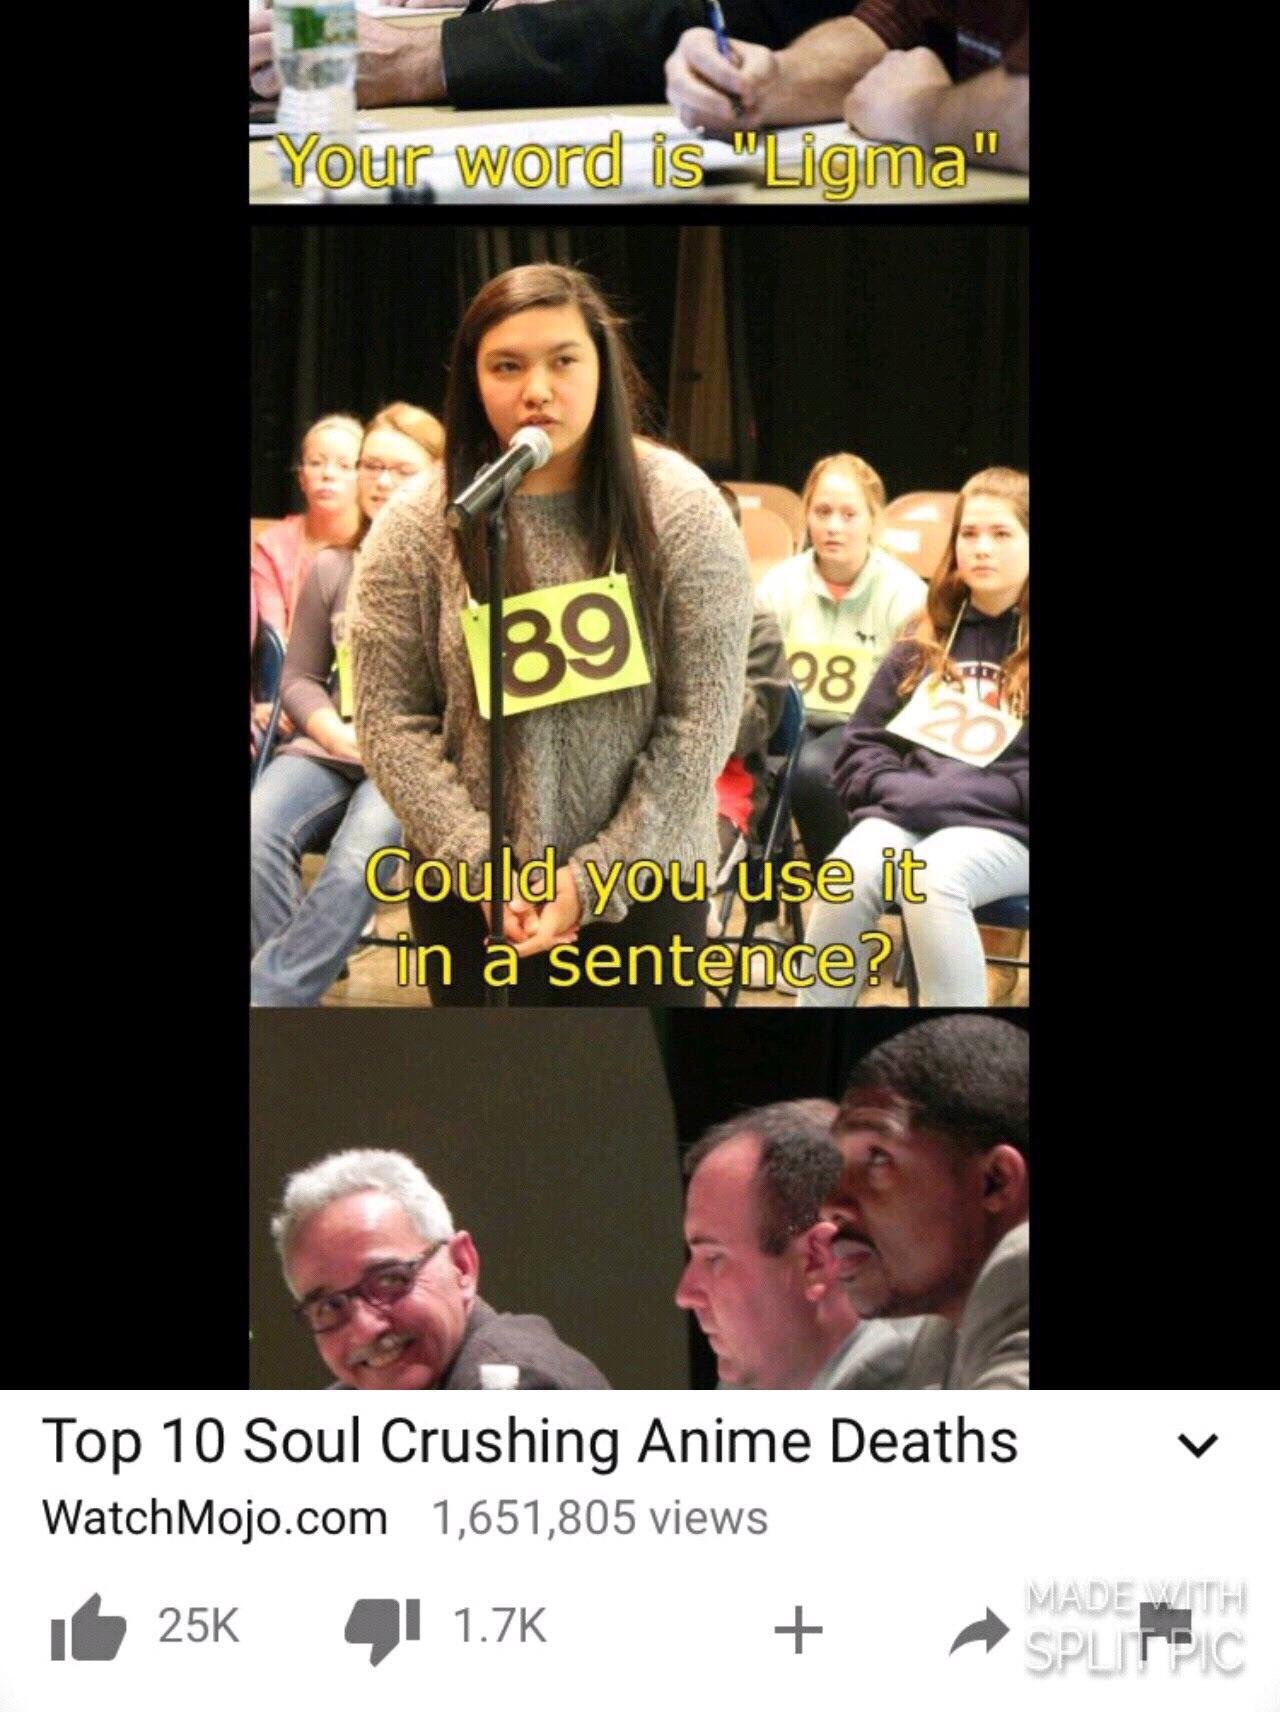 ligma spelling bee meme - Fyour word is "Ligma" Could you use it in a sentence? Top 10 Soul Crushing Anime Deaths WatchMojo.com 1,651,805 views it 25K I Spf